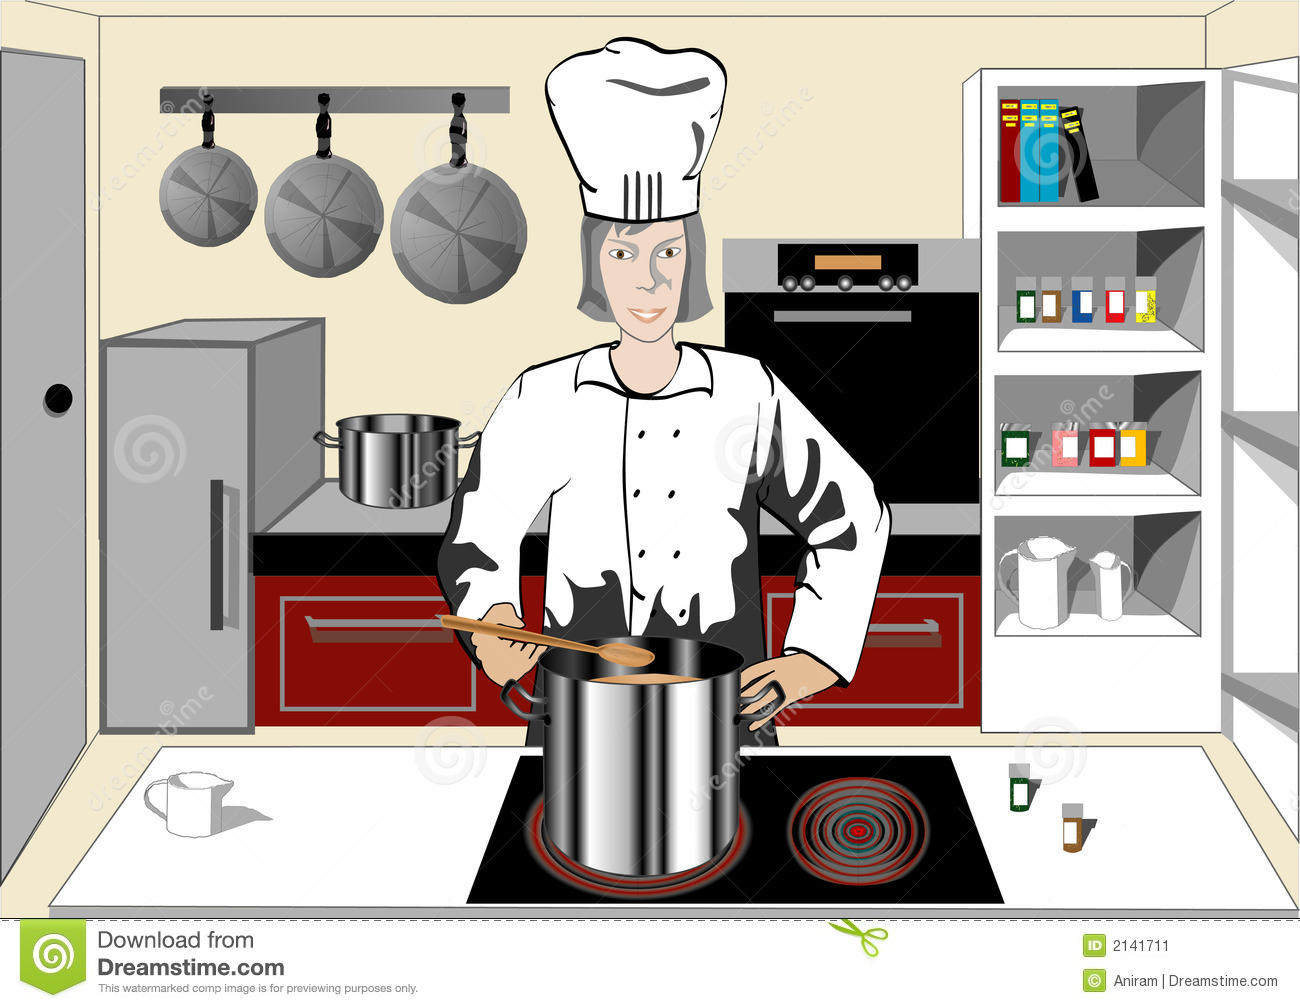 Chef In The Kitchen Stock Image   Image  2141711